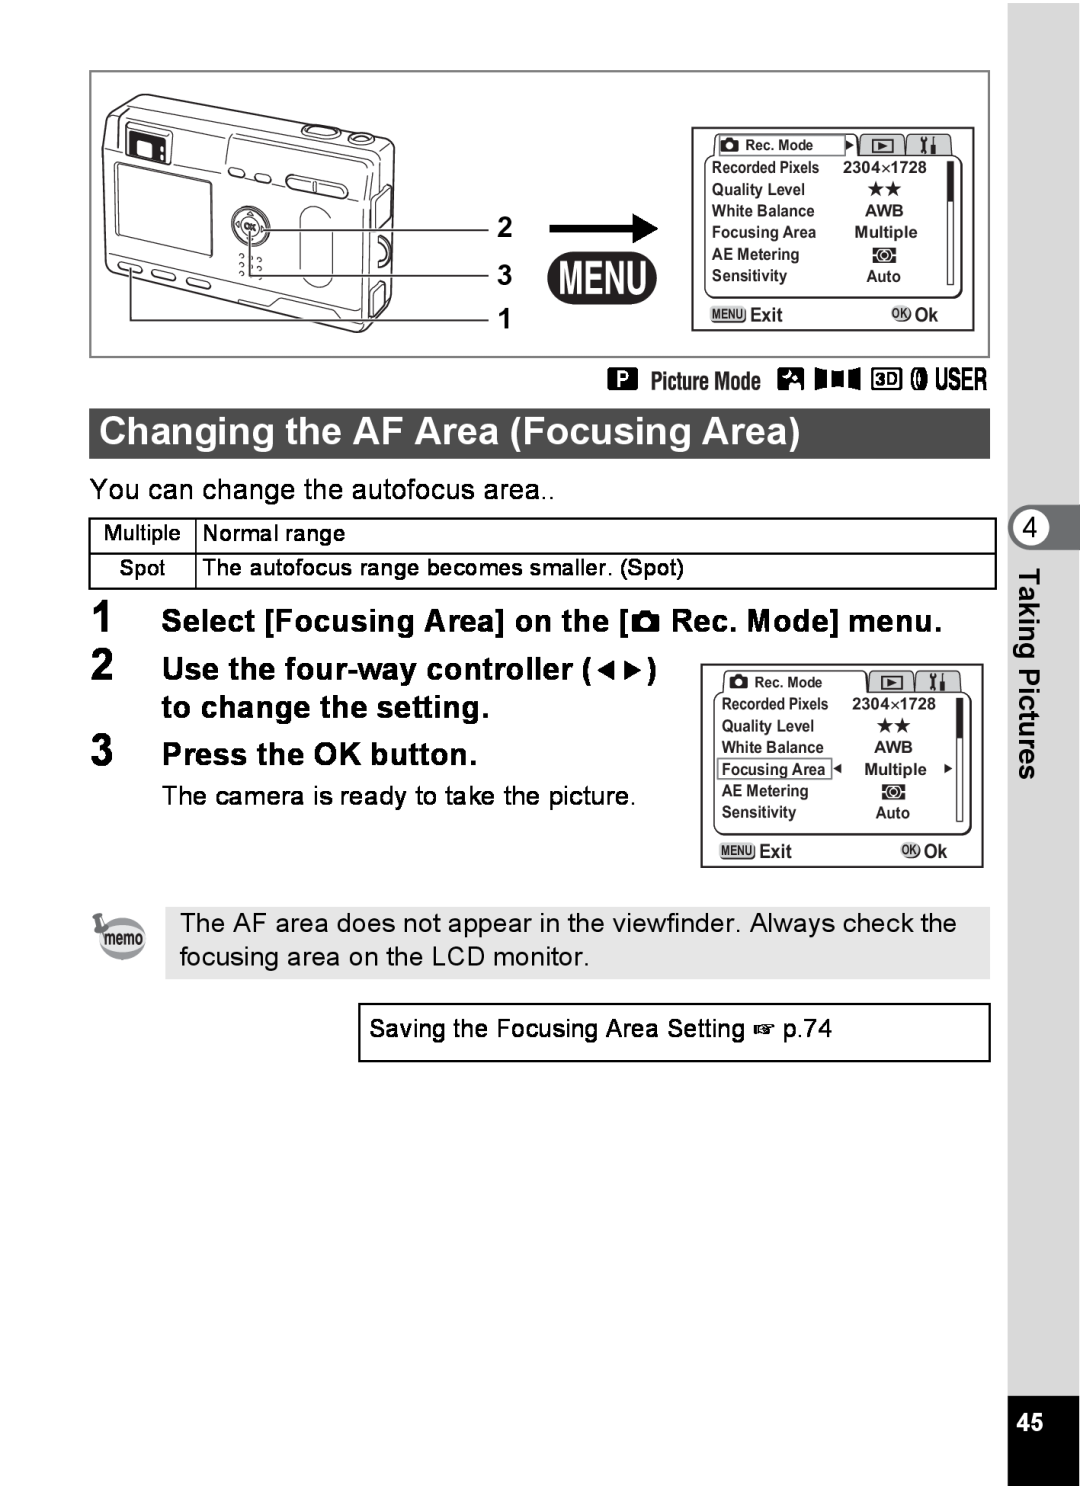 Pentax S4 Changing the AF Area Focusing Area, Select Focusing Area on the A Rec. Mode menu, to change the setting, B F Gde 